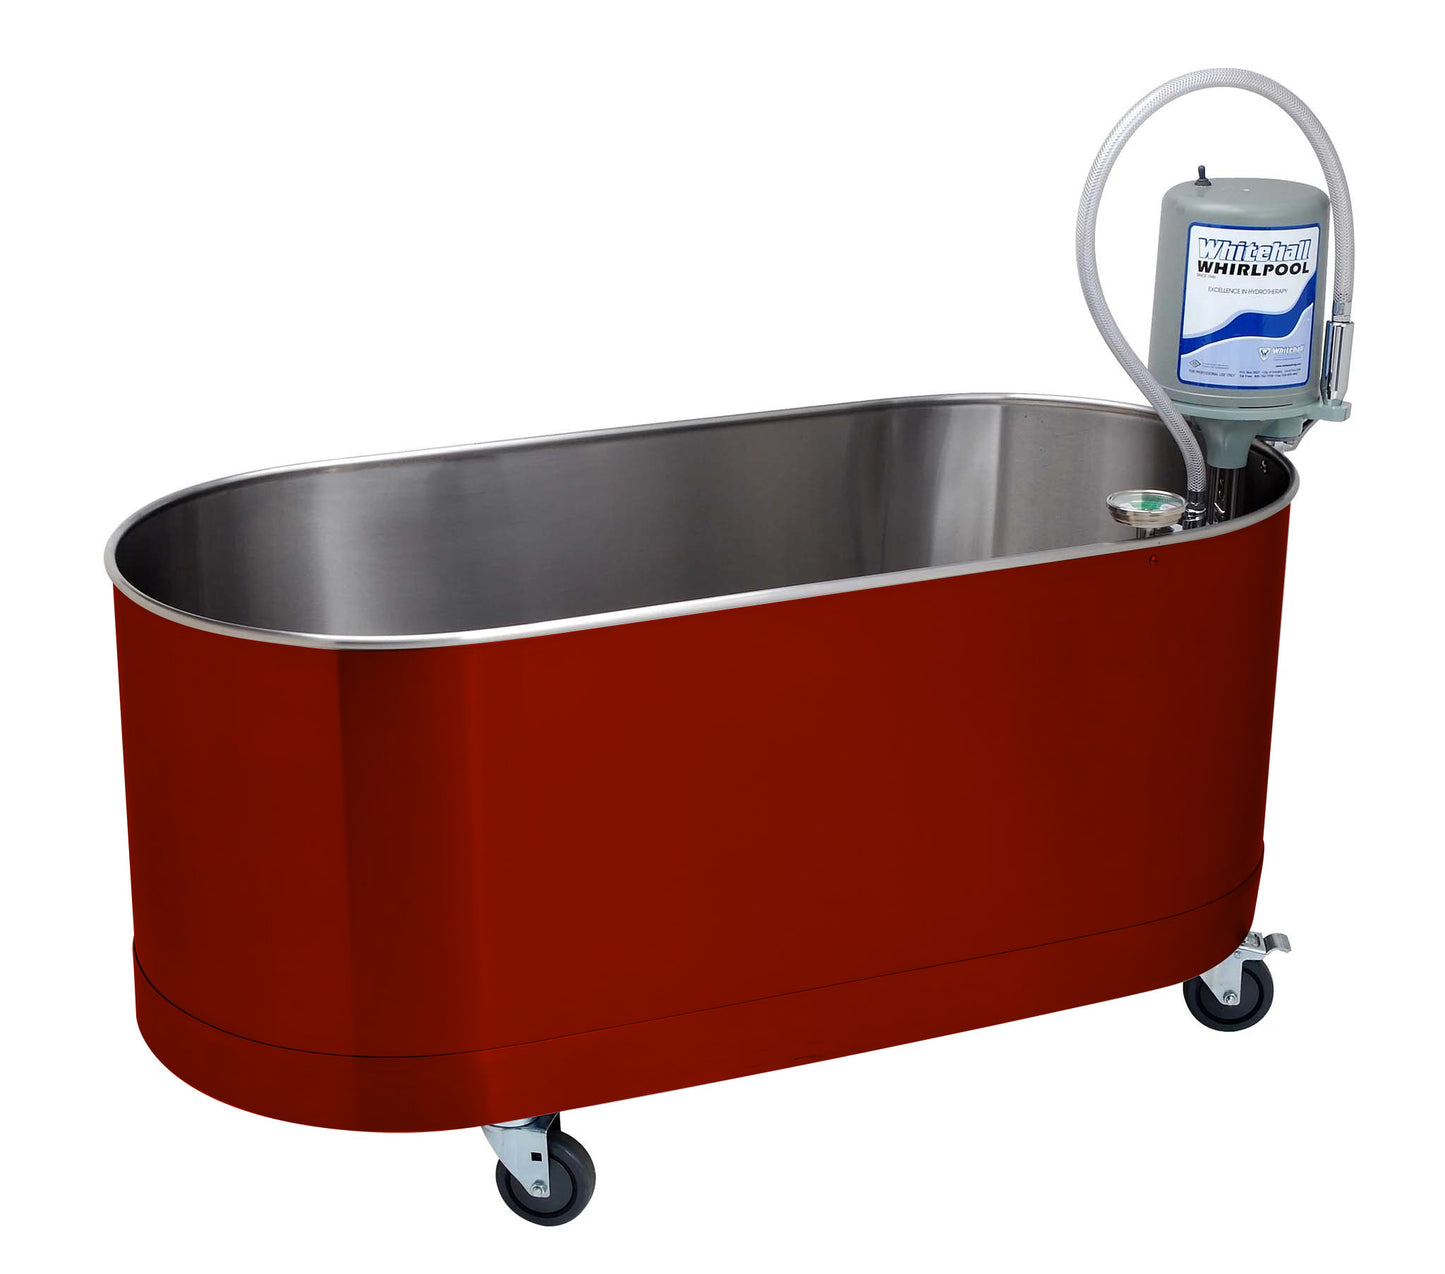 Firehouse Red L-75-M 75 Gallon Mobile Whirlpool